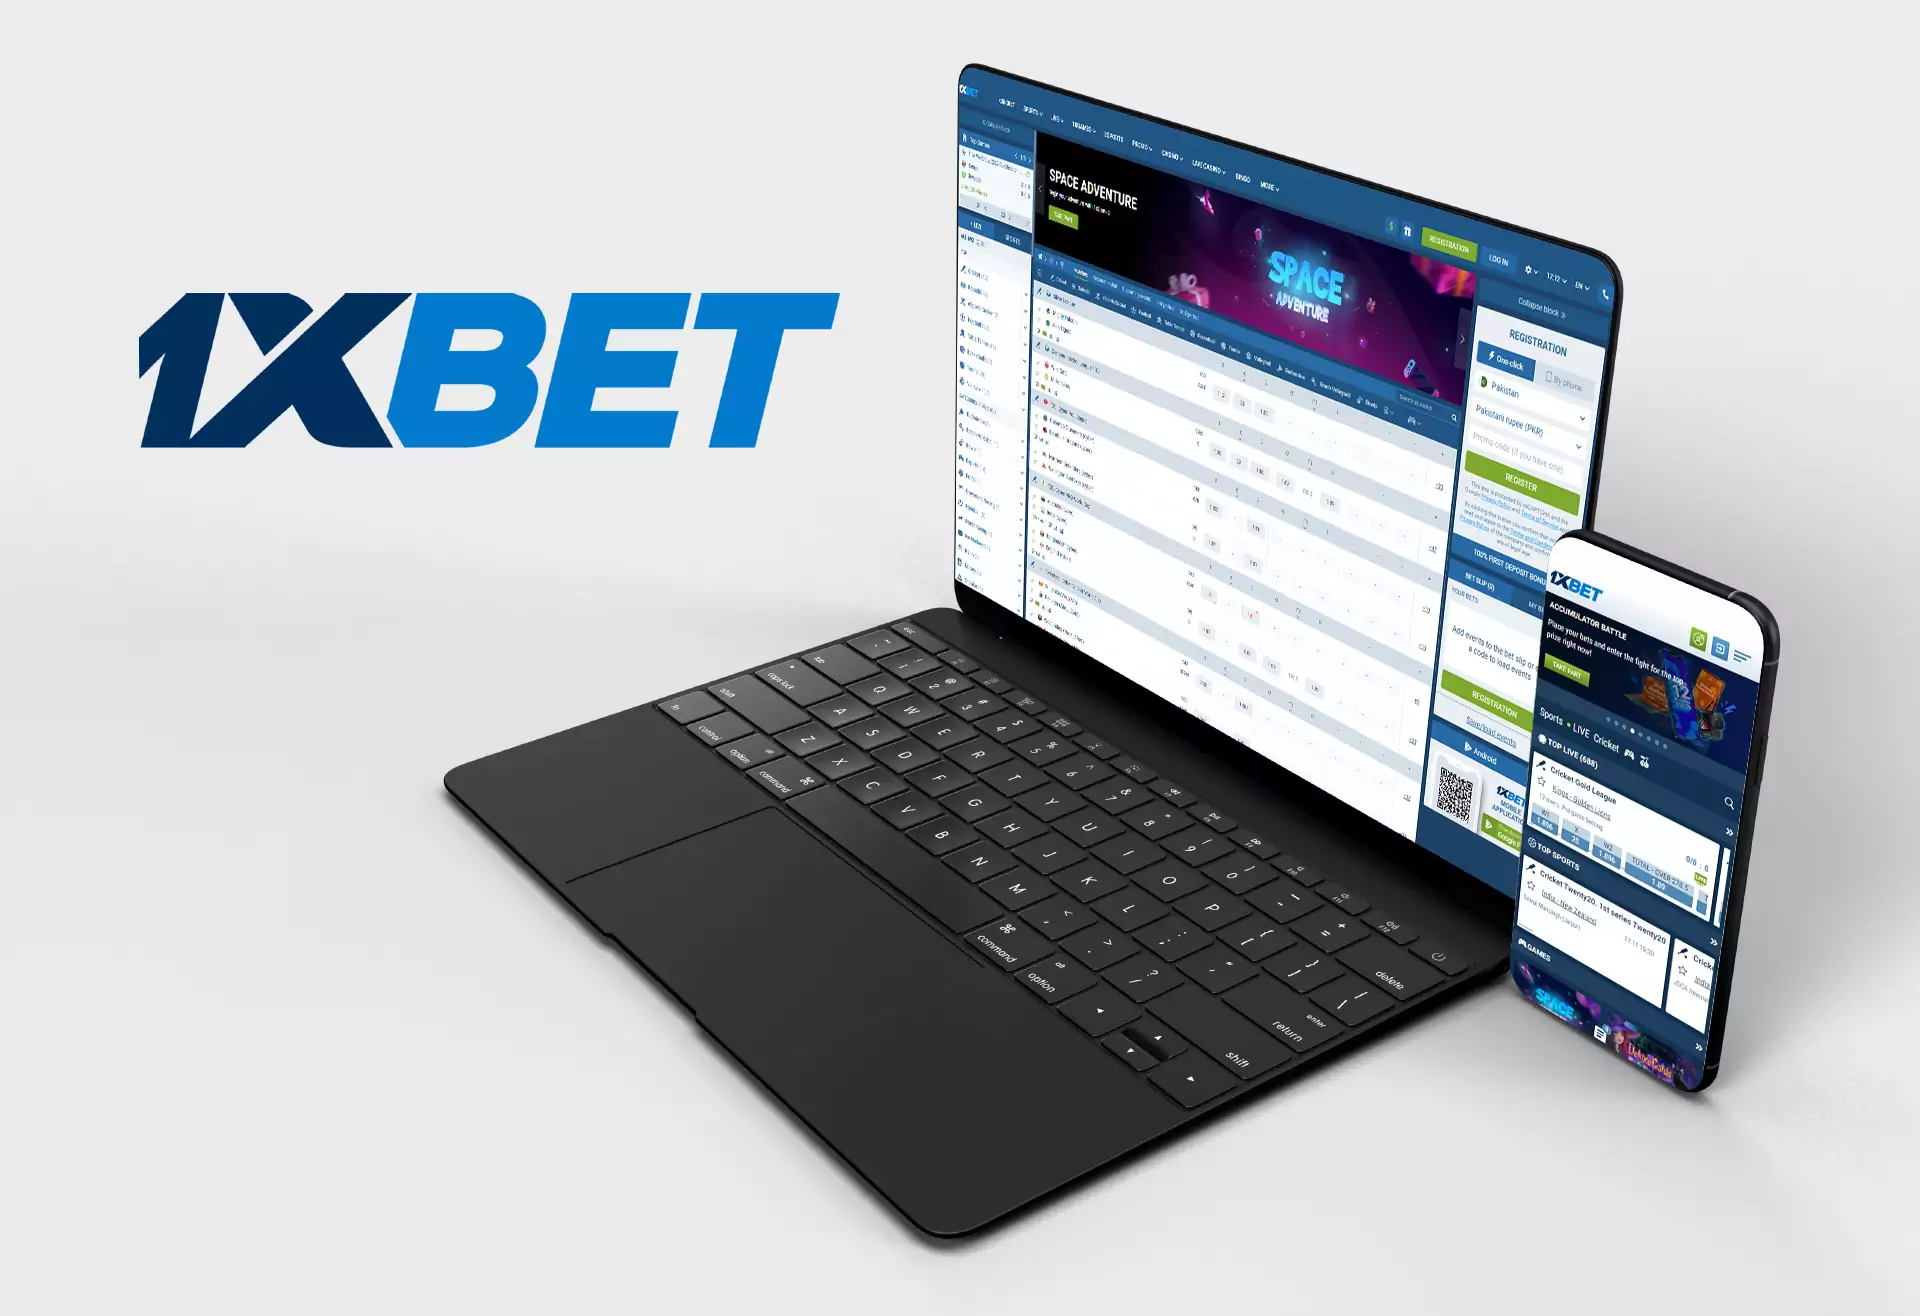 The 1xbet bookmaker is licensed by Curacao and accepts deposits from Pakistani users.